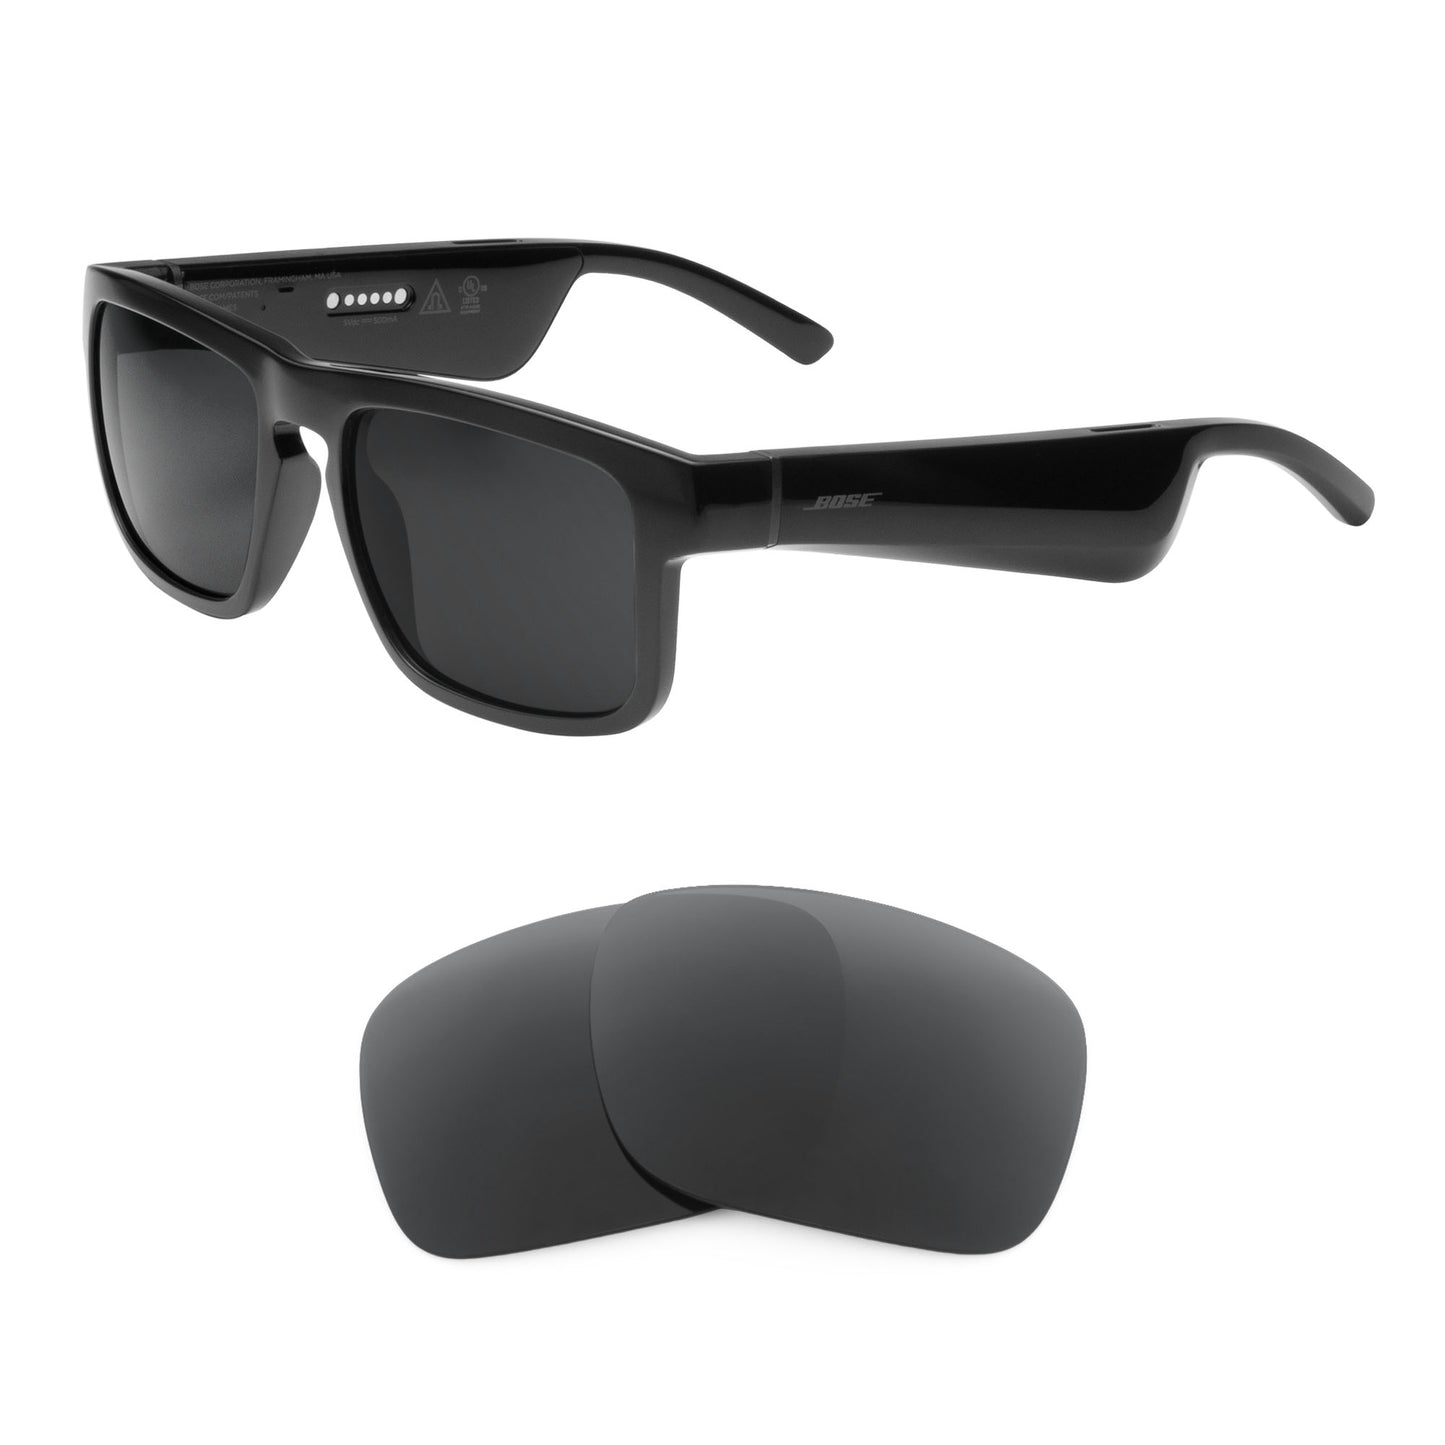 Bose Tenor sunglasses with replacement lenses